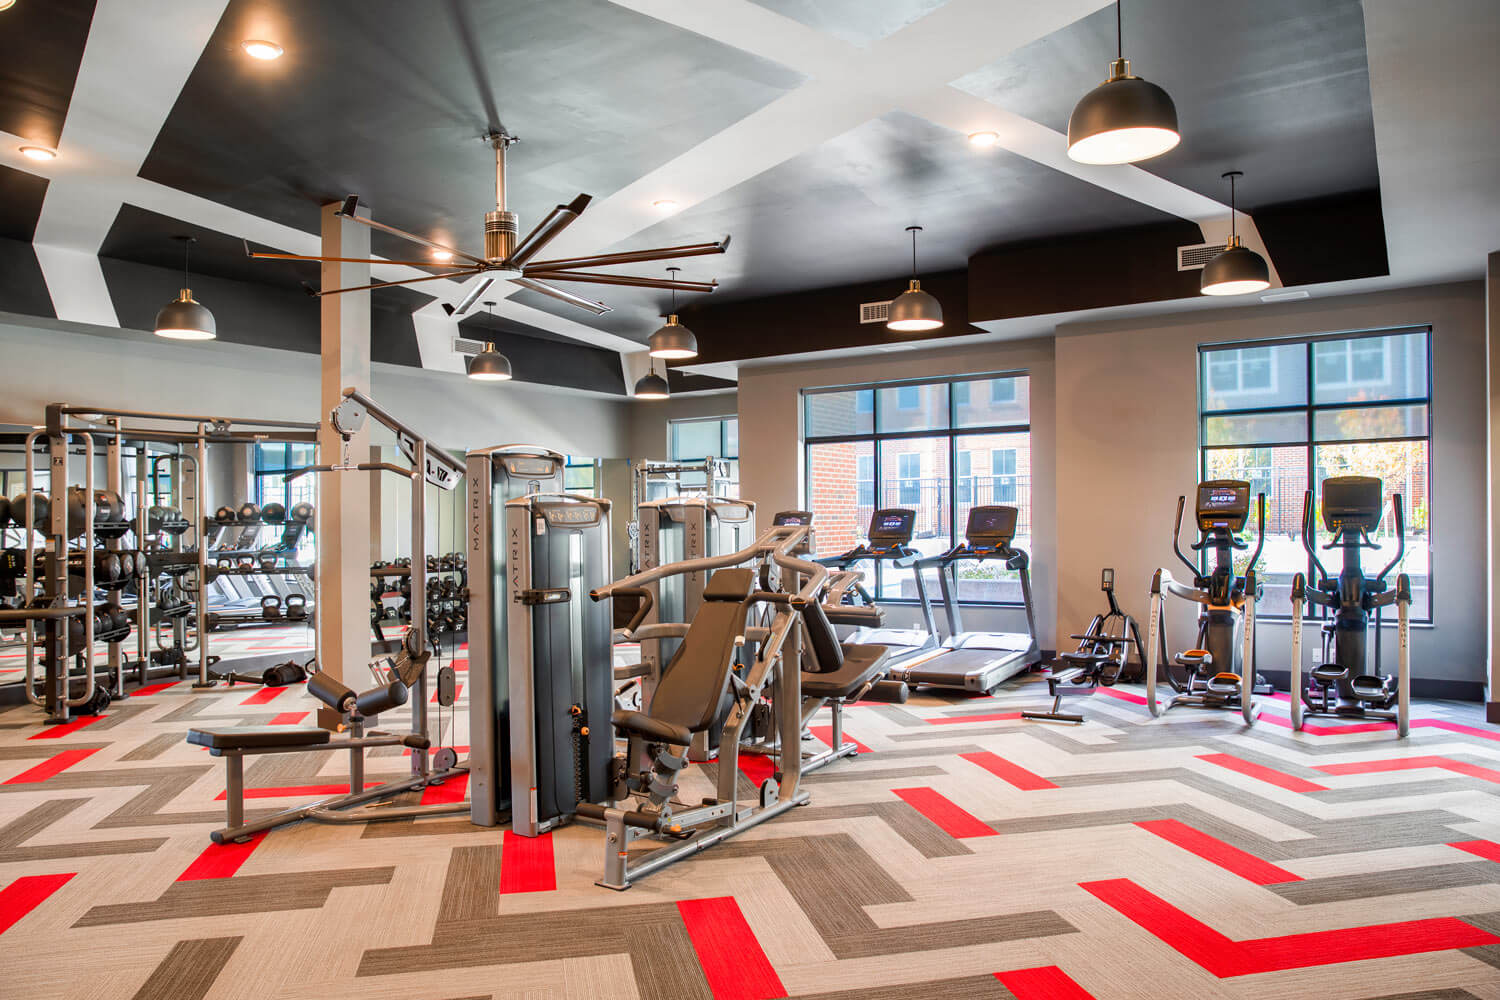 Fitness center Hanover MD | Dartmoor Place